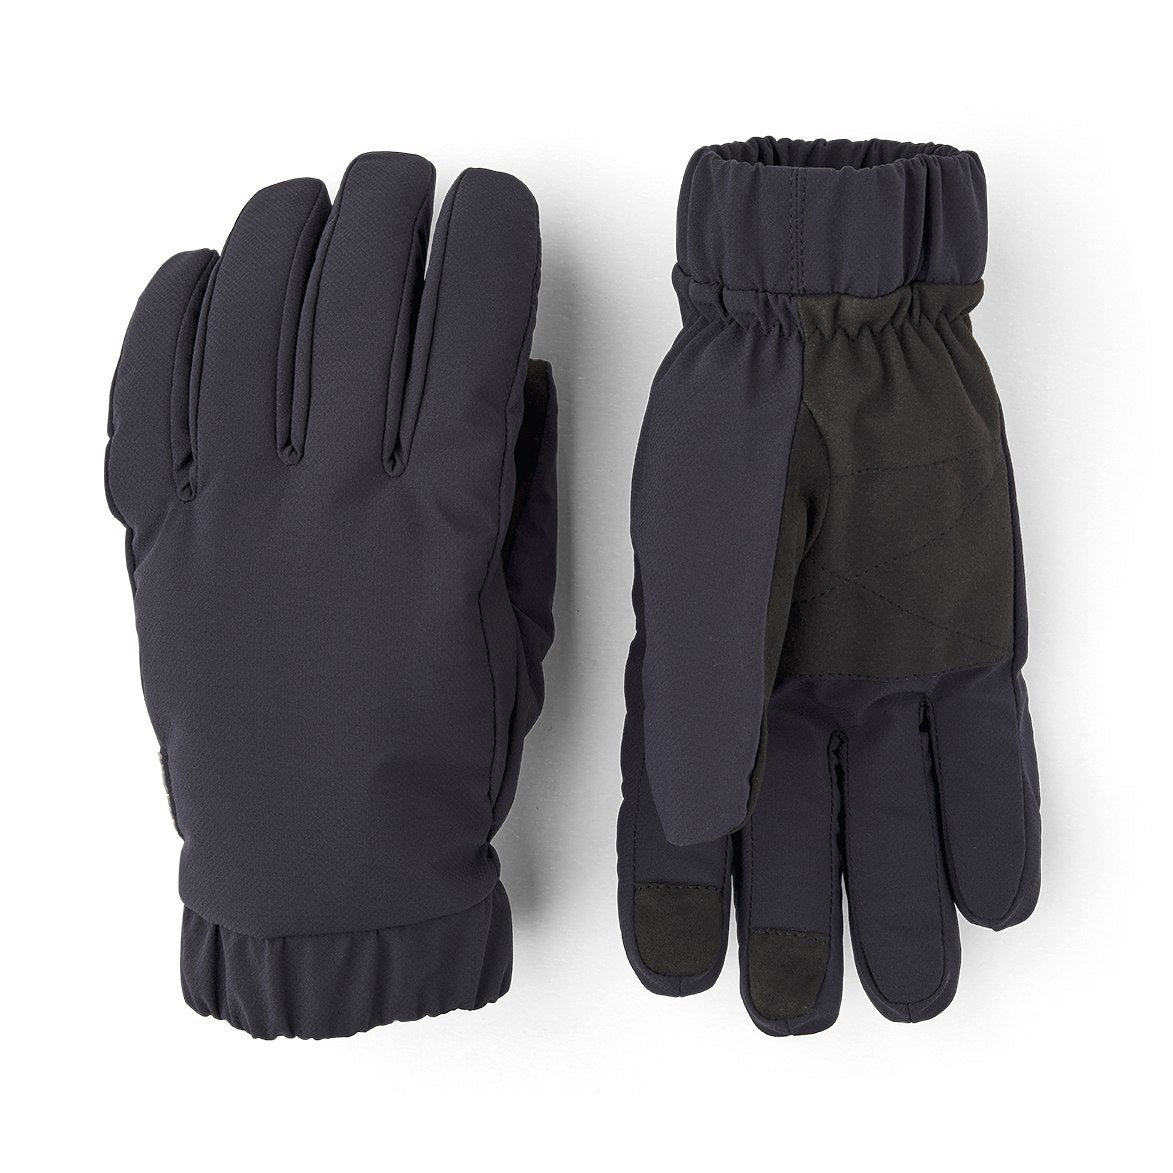 Hestra Axis Warming Glove in Black